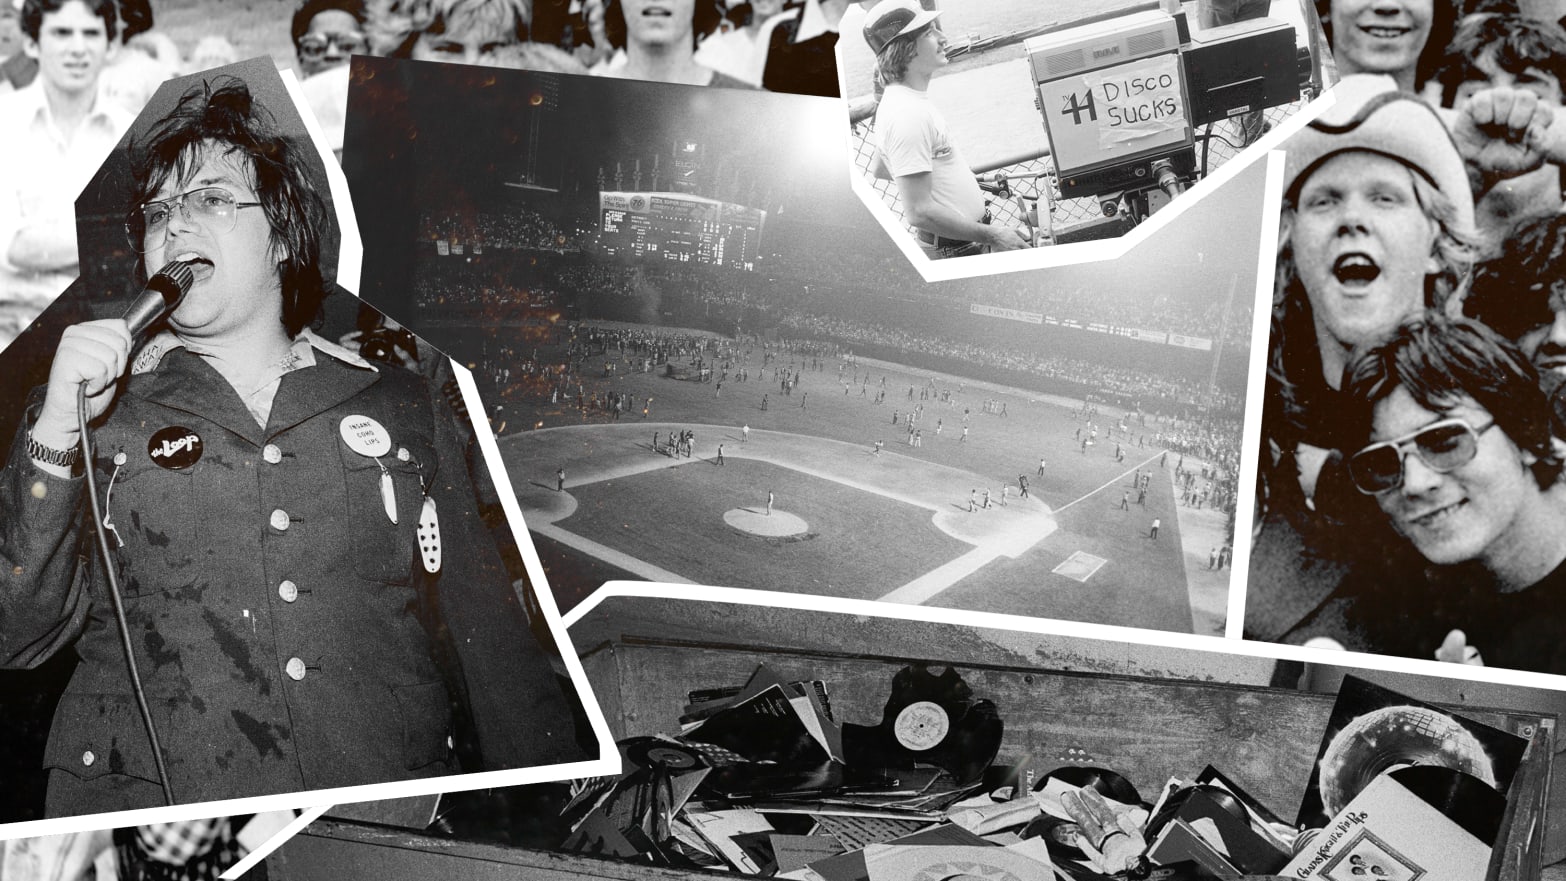 The Night Rock Fans Rioted to Kill Disco — at a Chicago Baseball Game